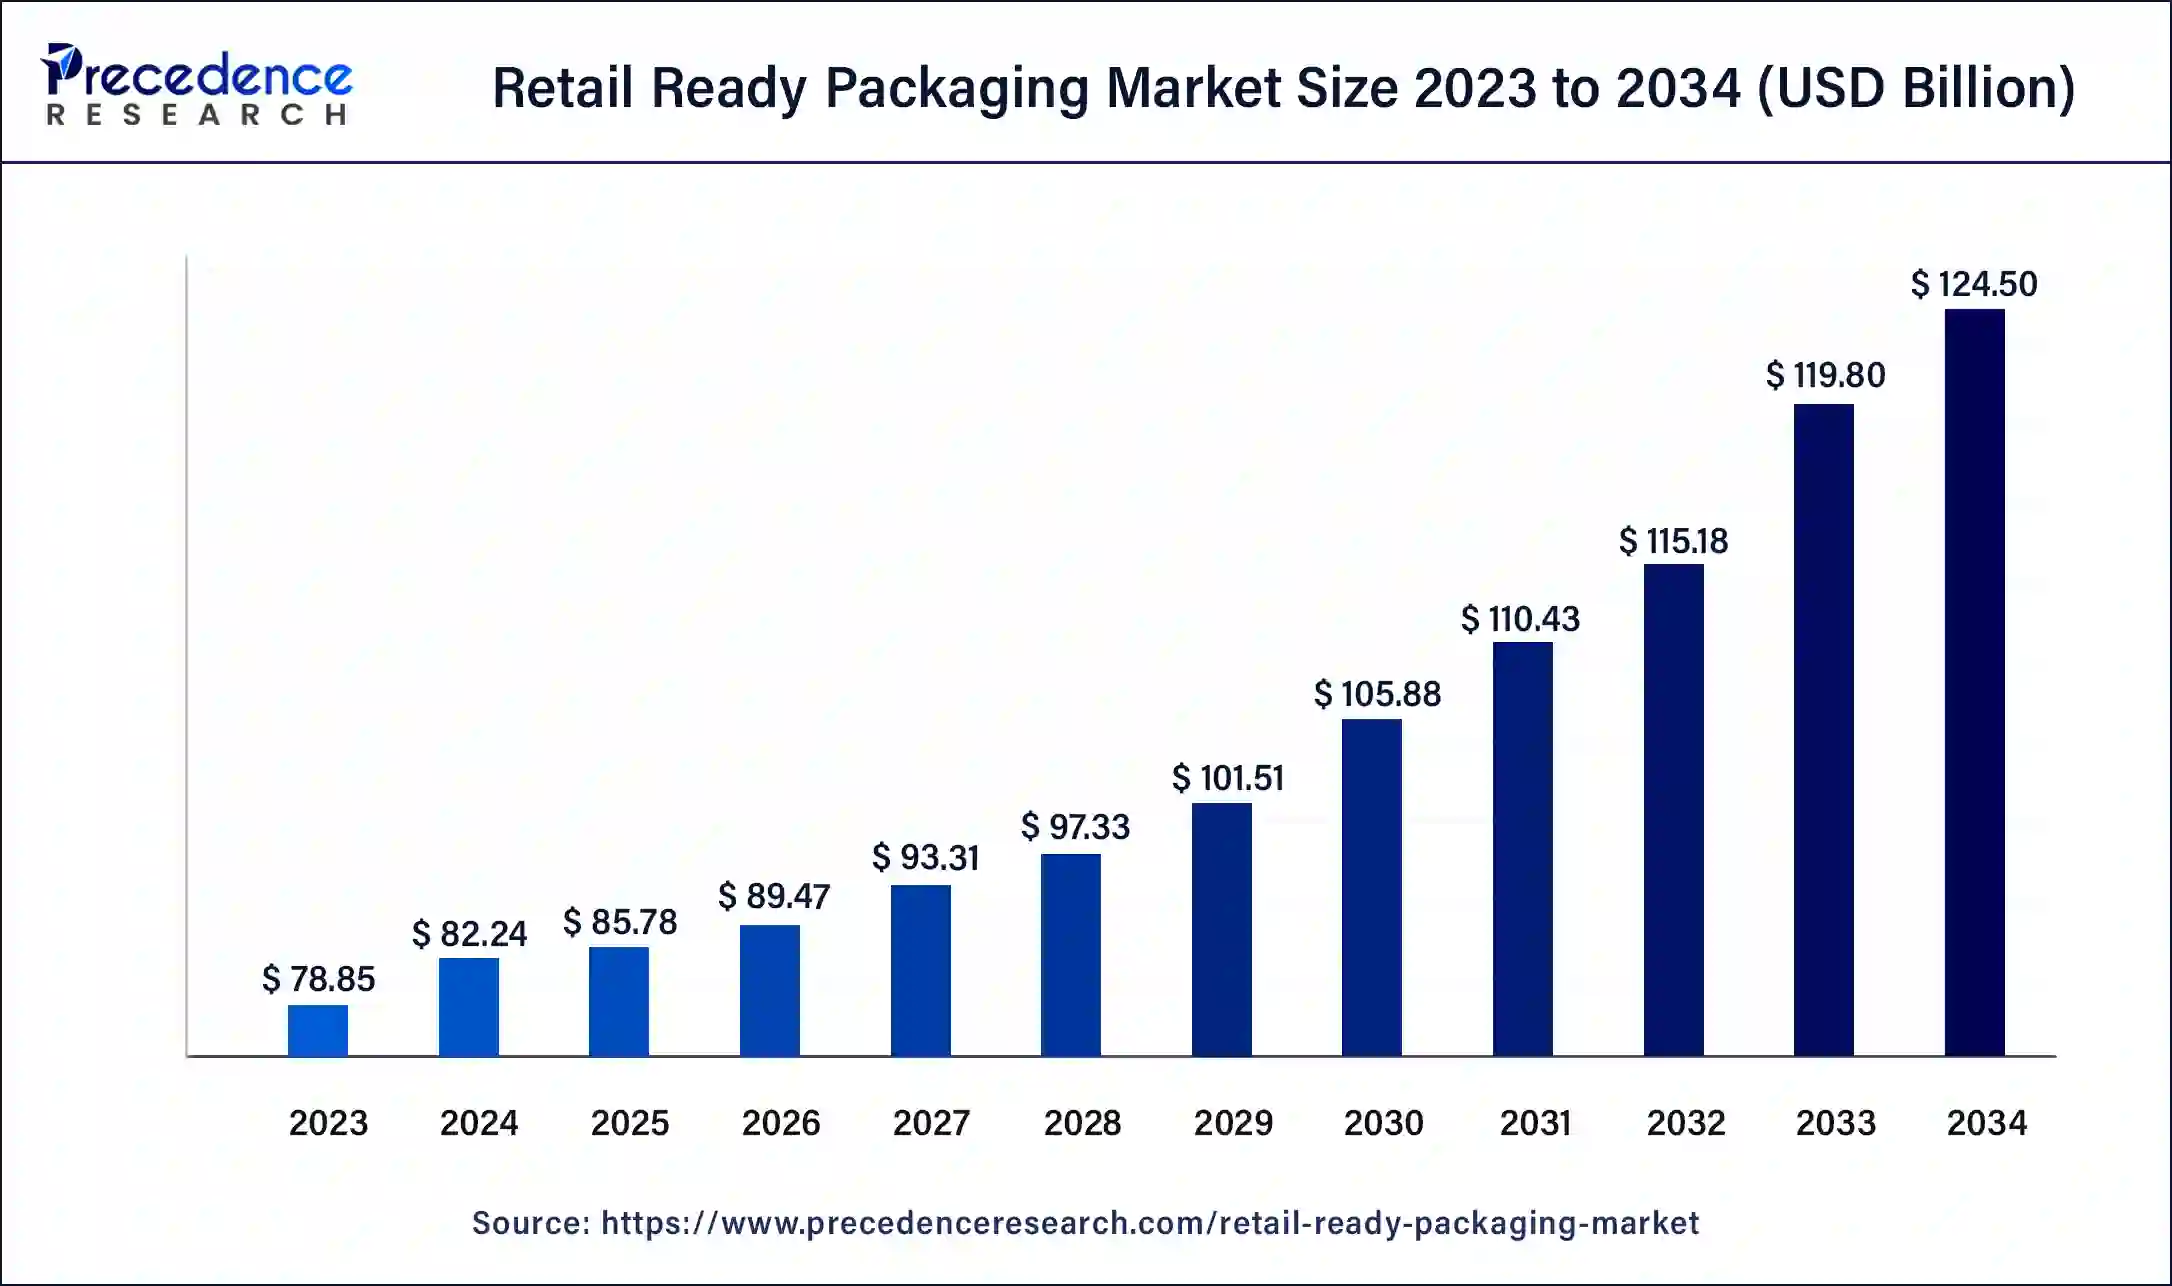 Retail Ready Packaging Market Size 2024 to 2034